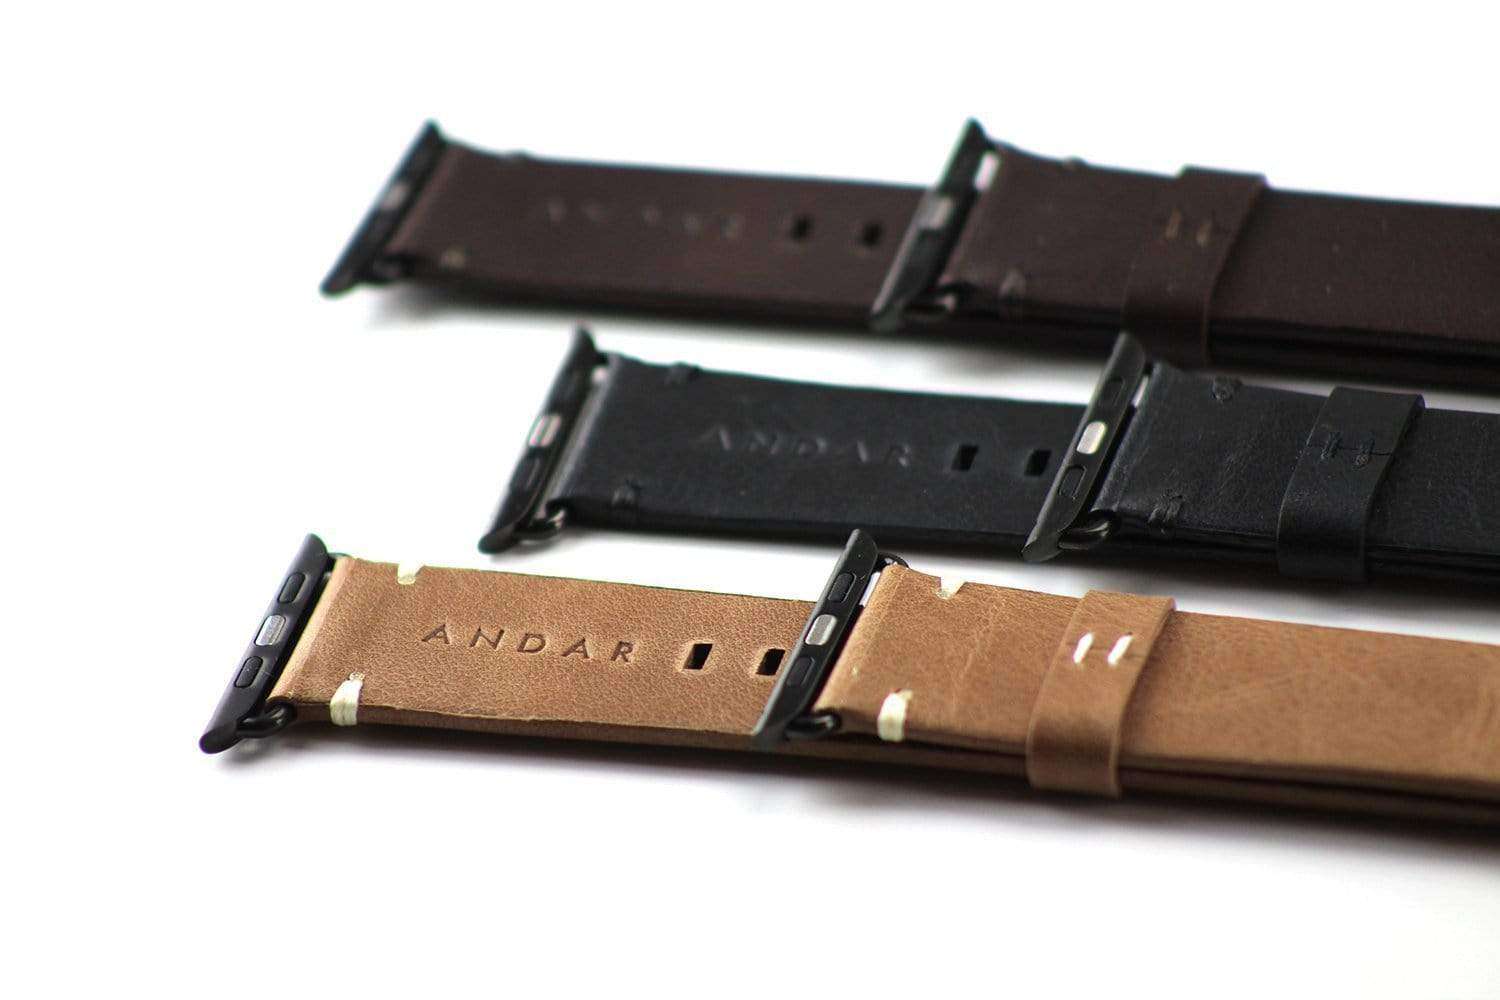 The Watch Band